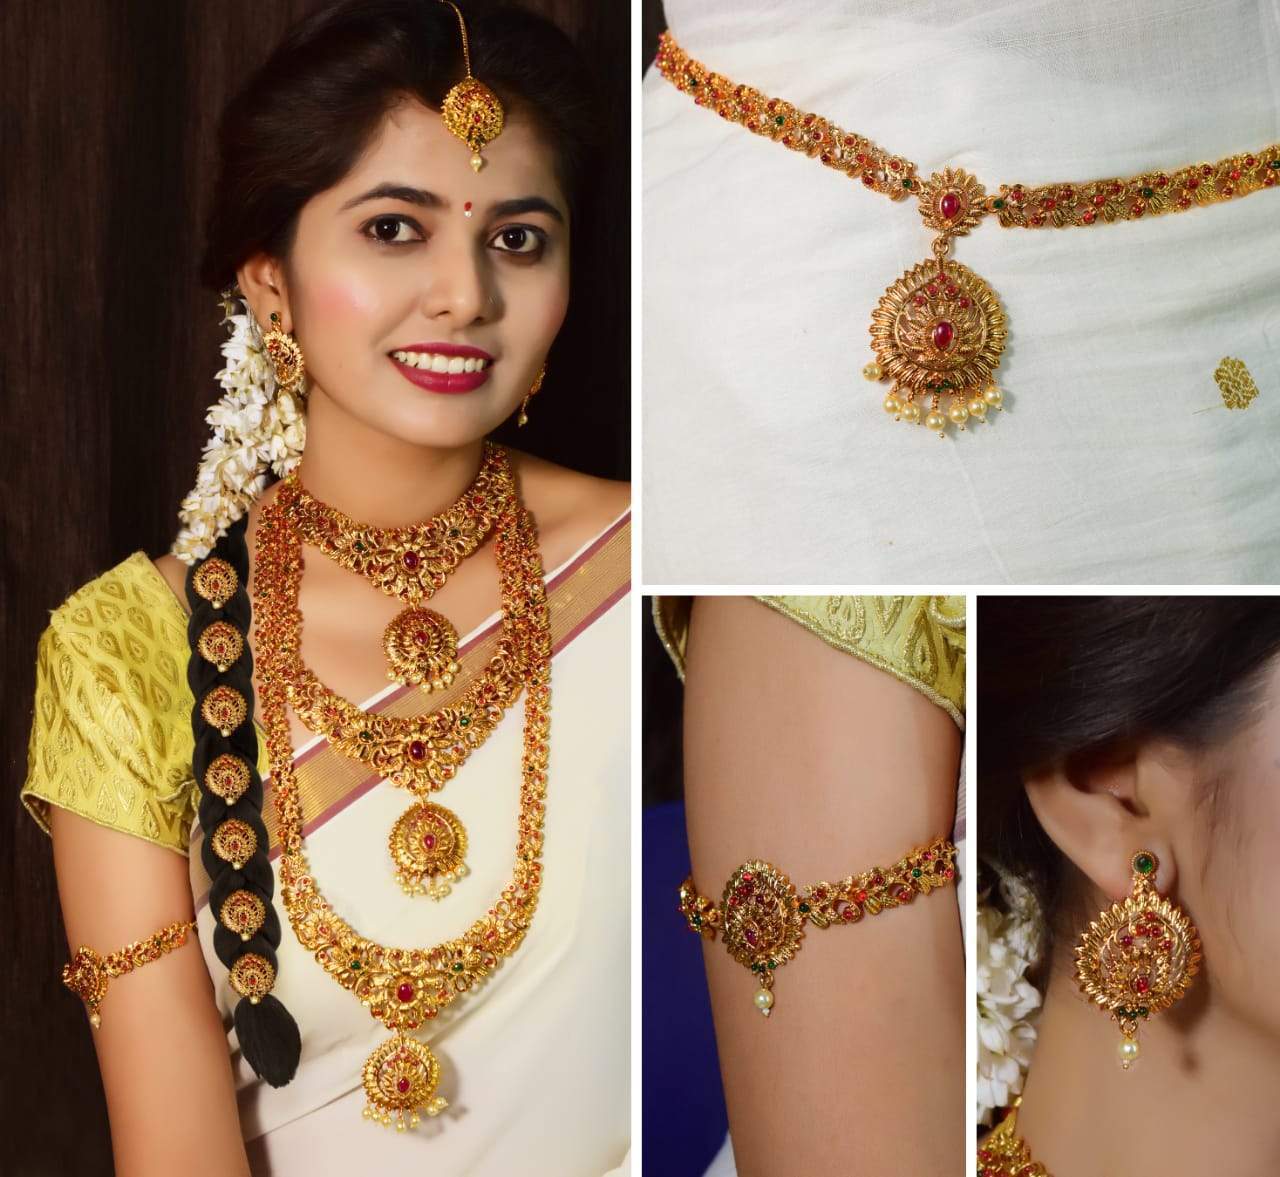 Bahubali Design Antique Gold Finish Full Bridal Set Combo FREE Express Delivery NSN02-1450-2388N